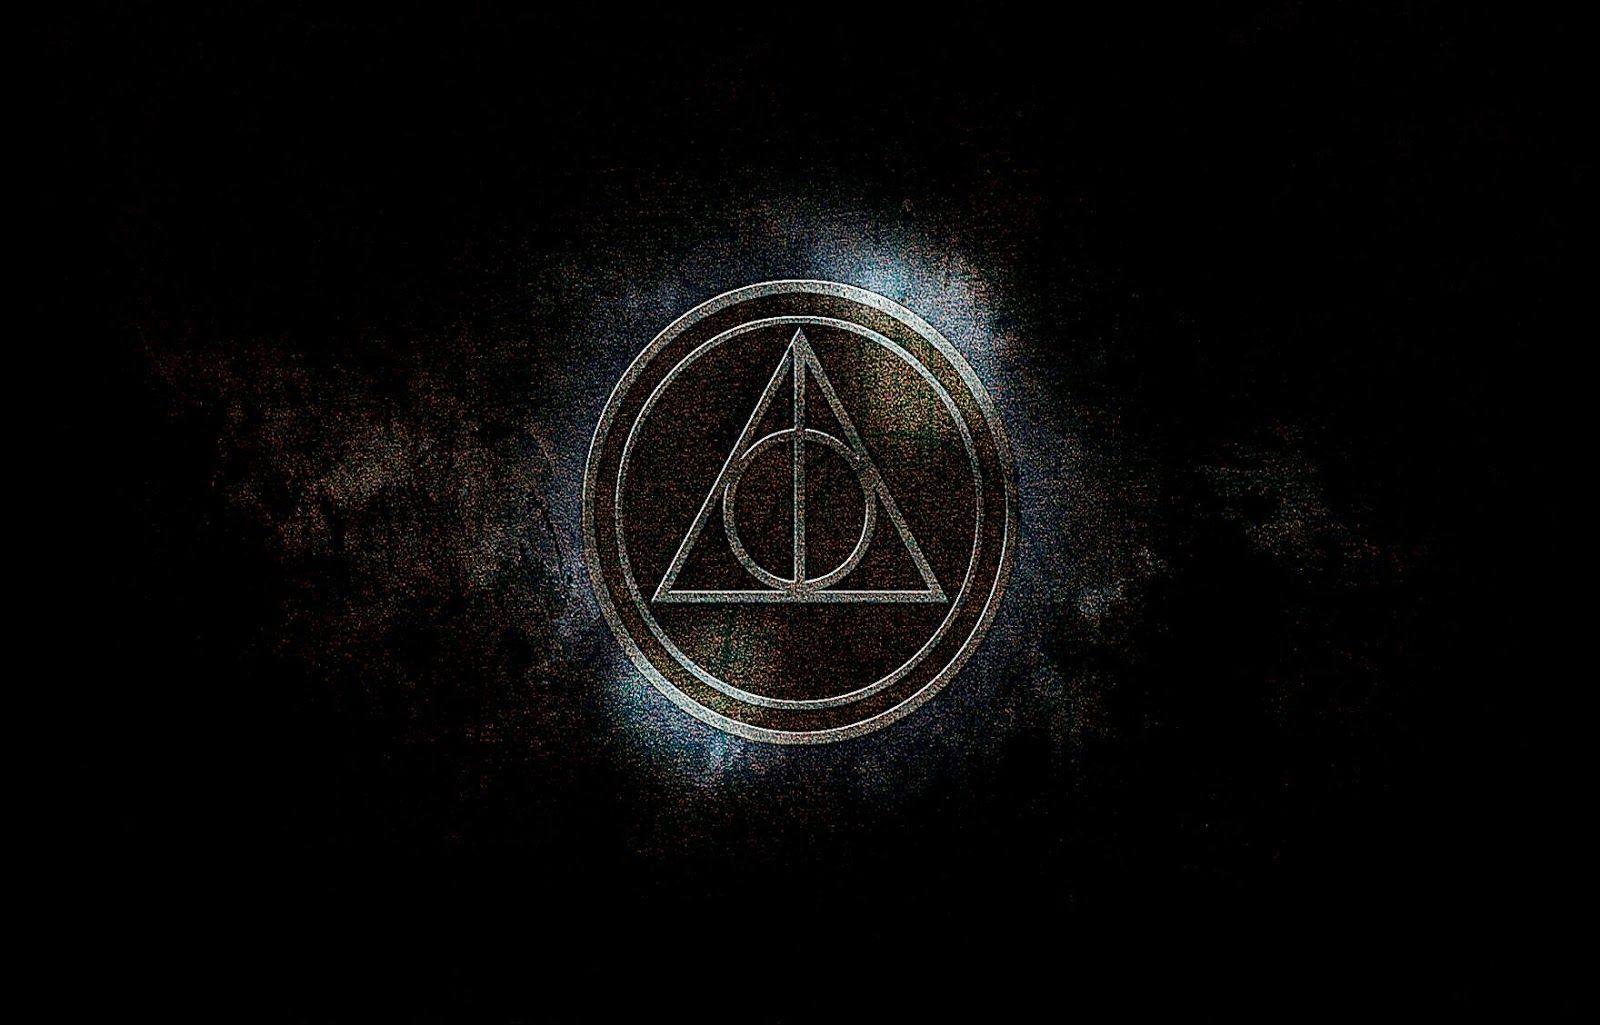 Deathly Hallows Wallpaper. Deathly